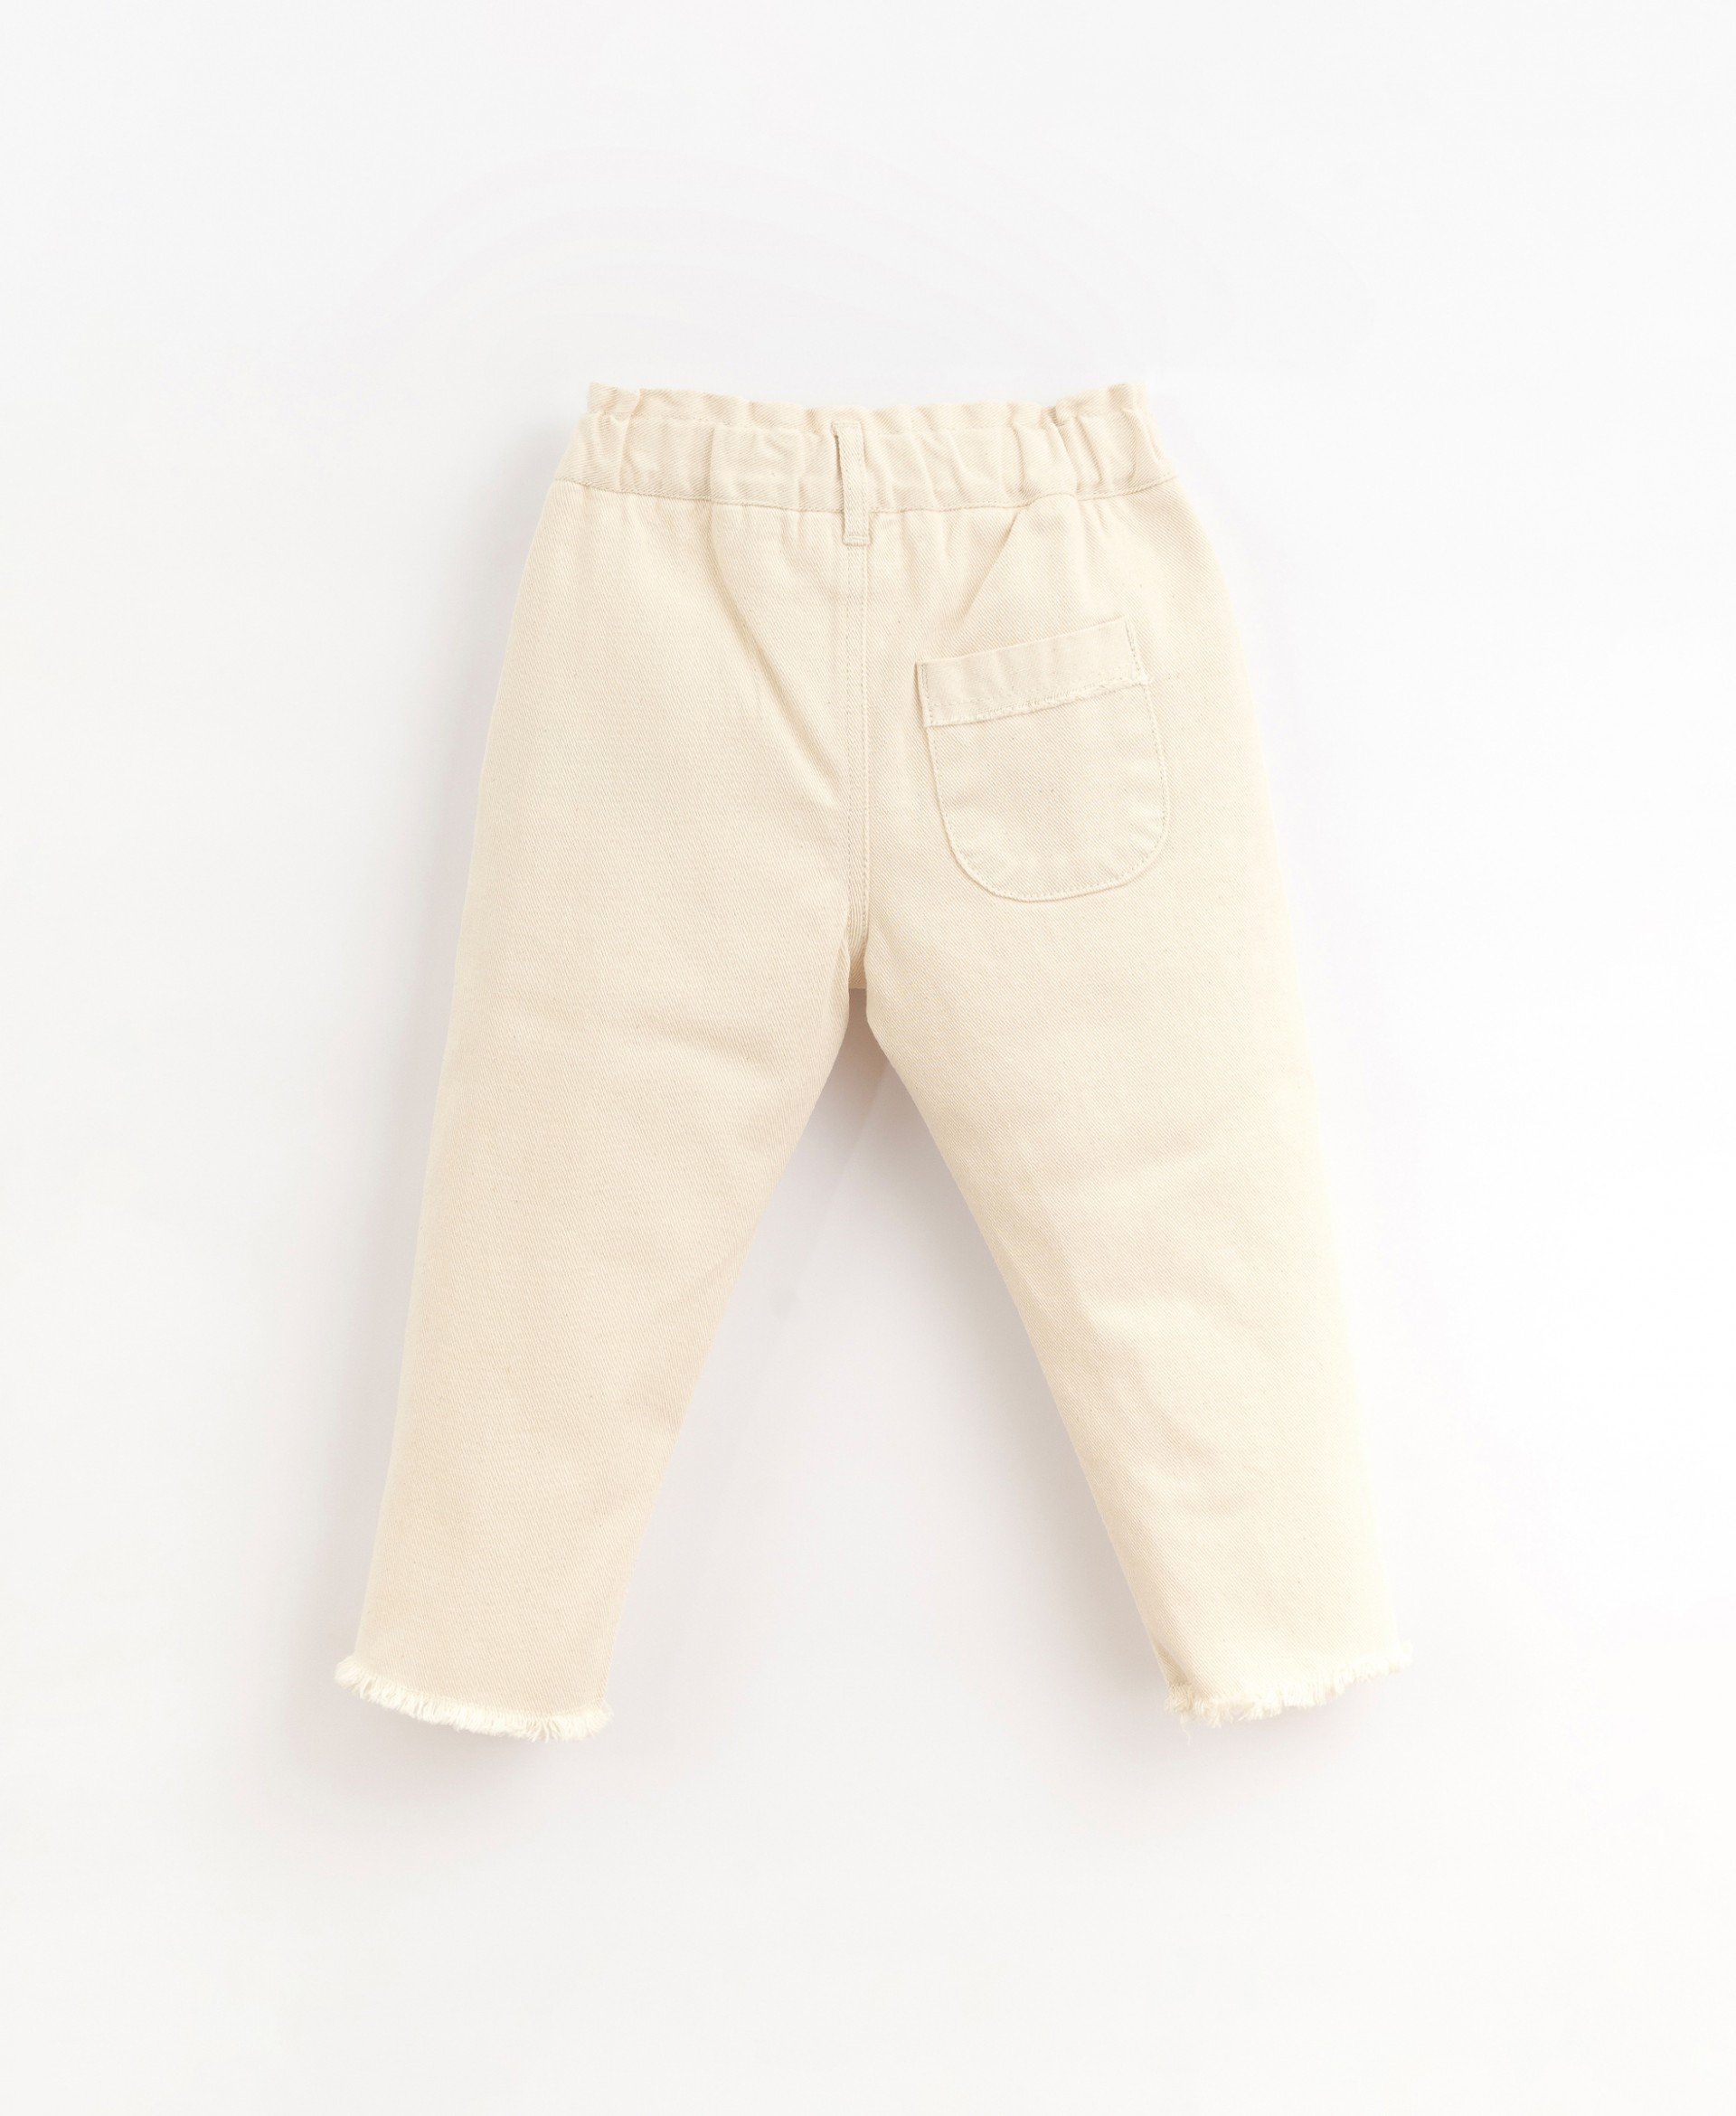 Naturally dyed serge trousers | Organic Care